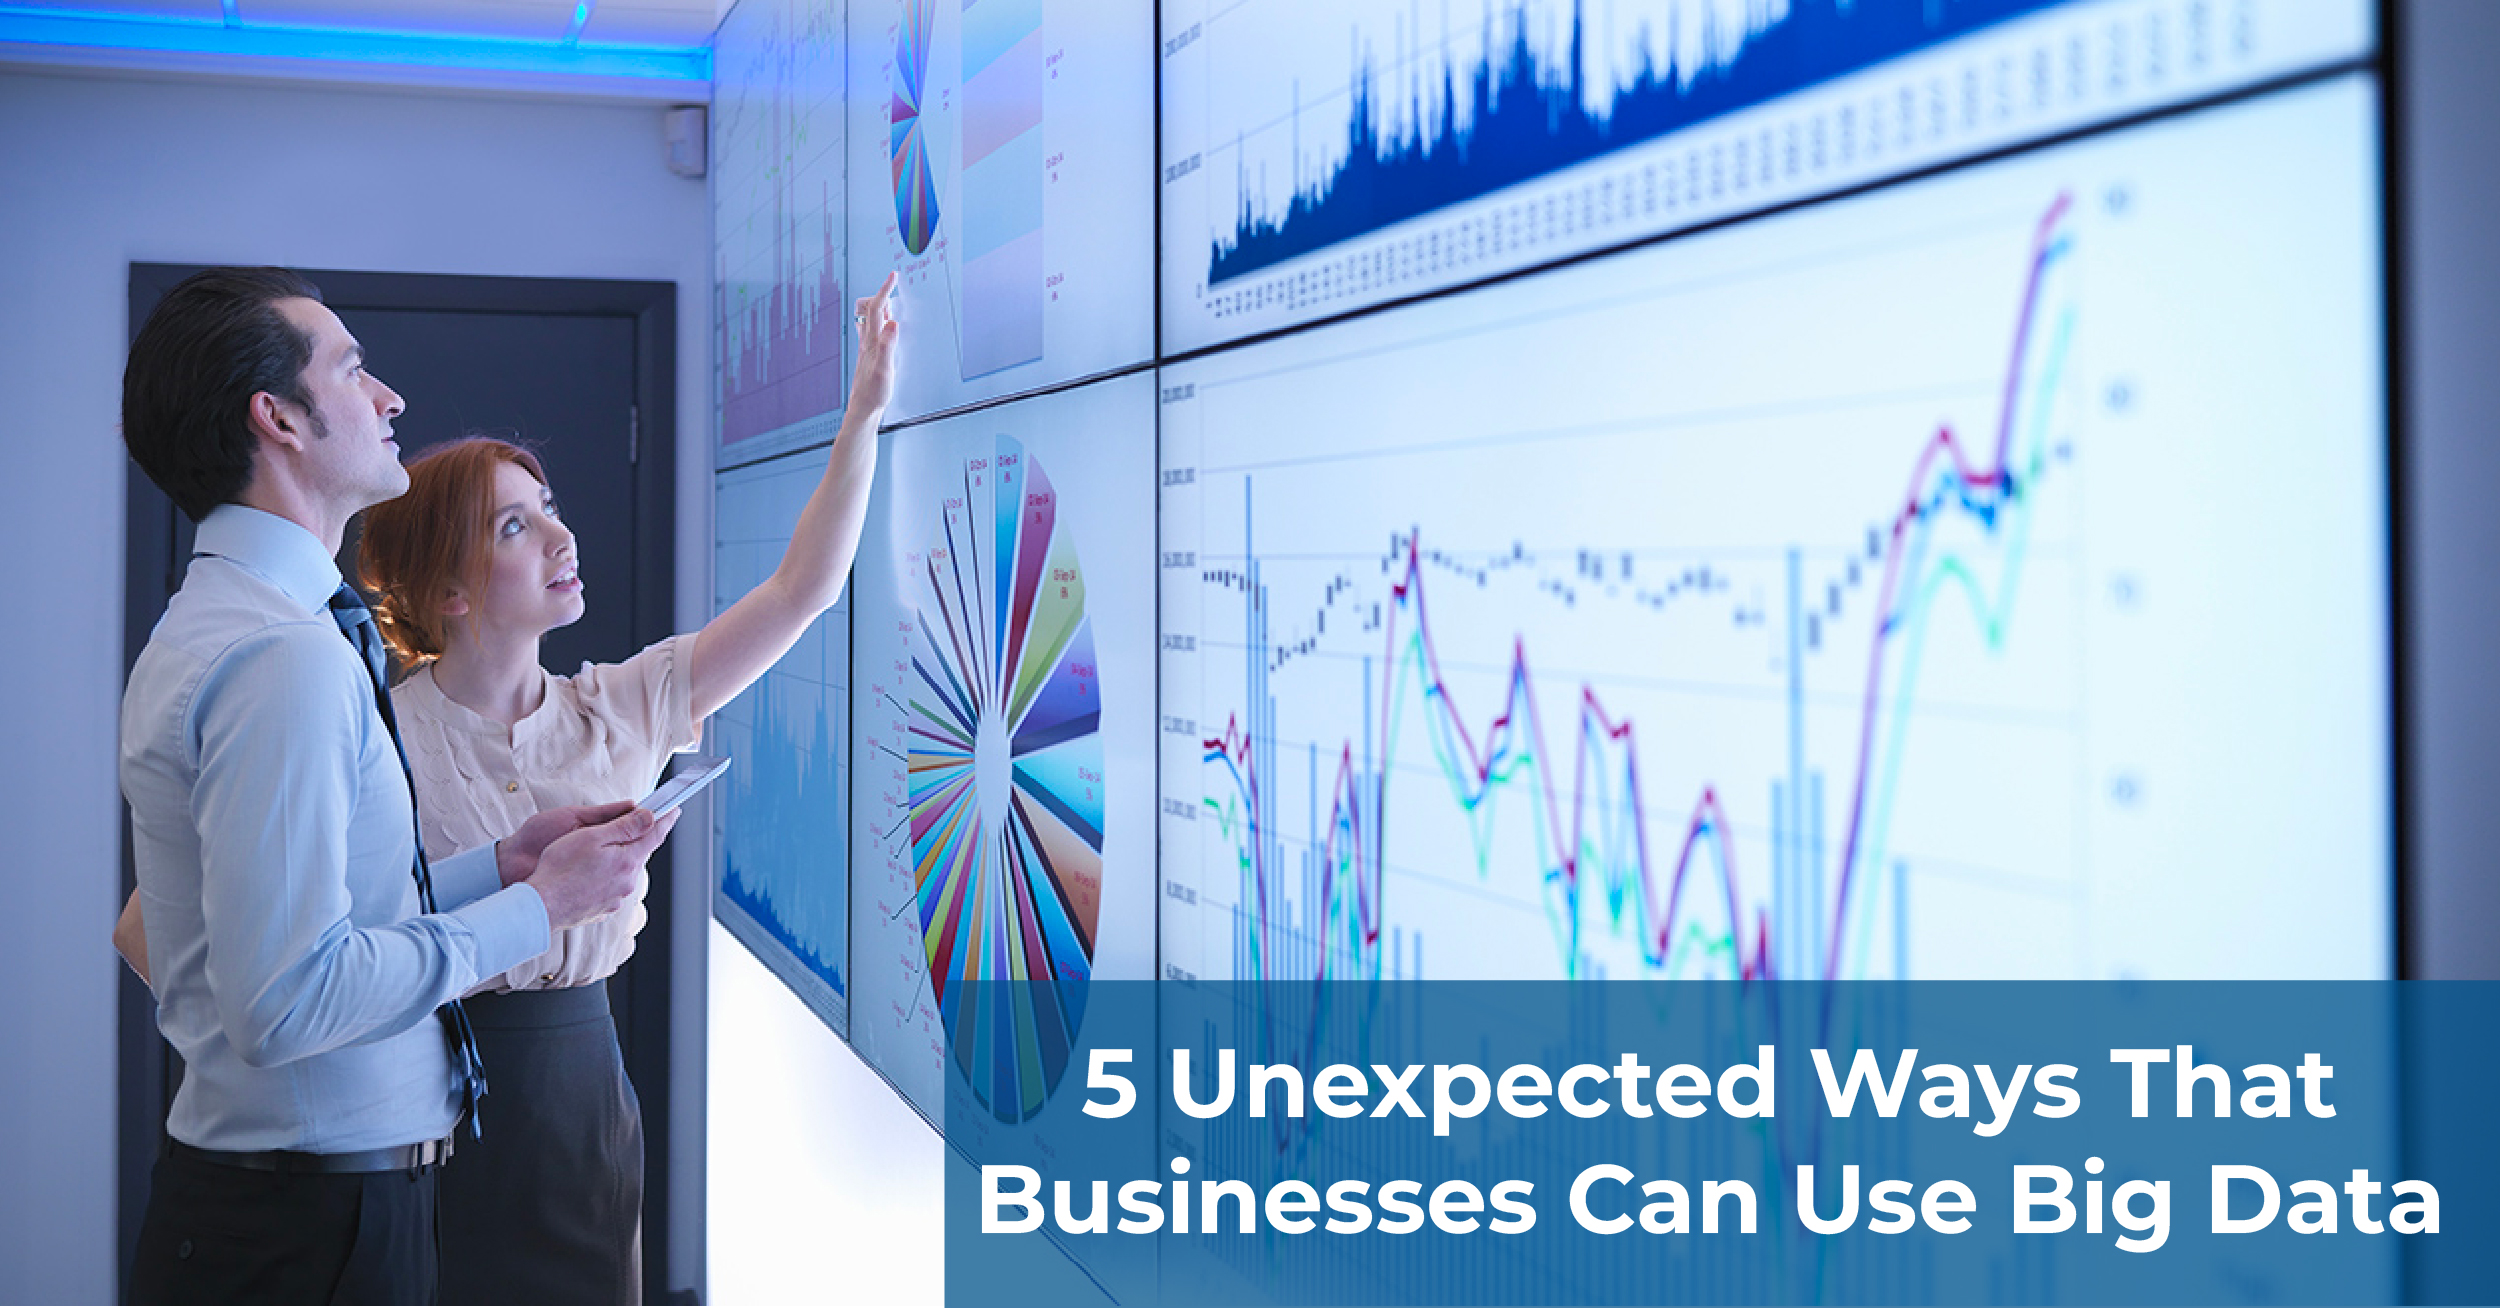 5 Unexpected Ways That Businesses Can Use Big Data